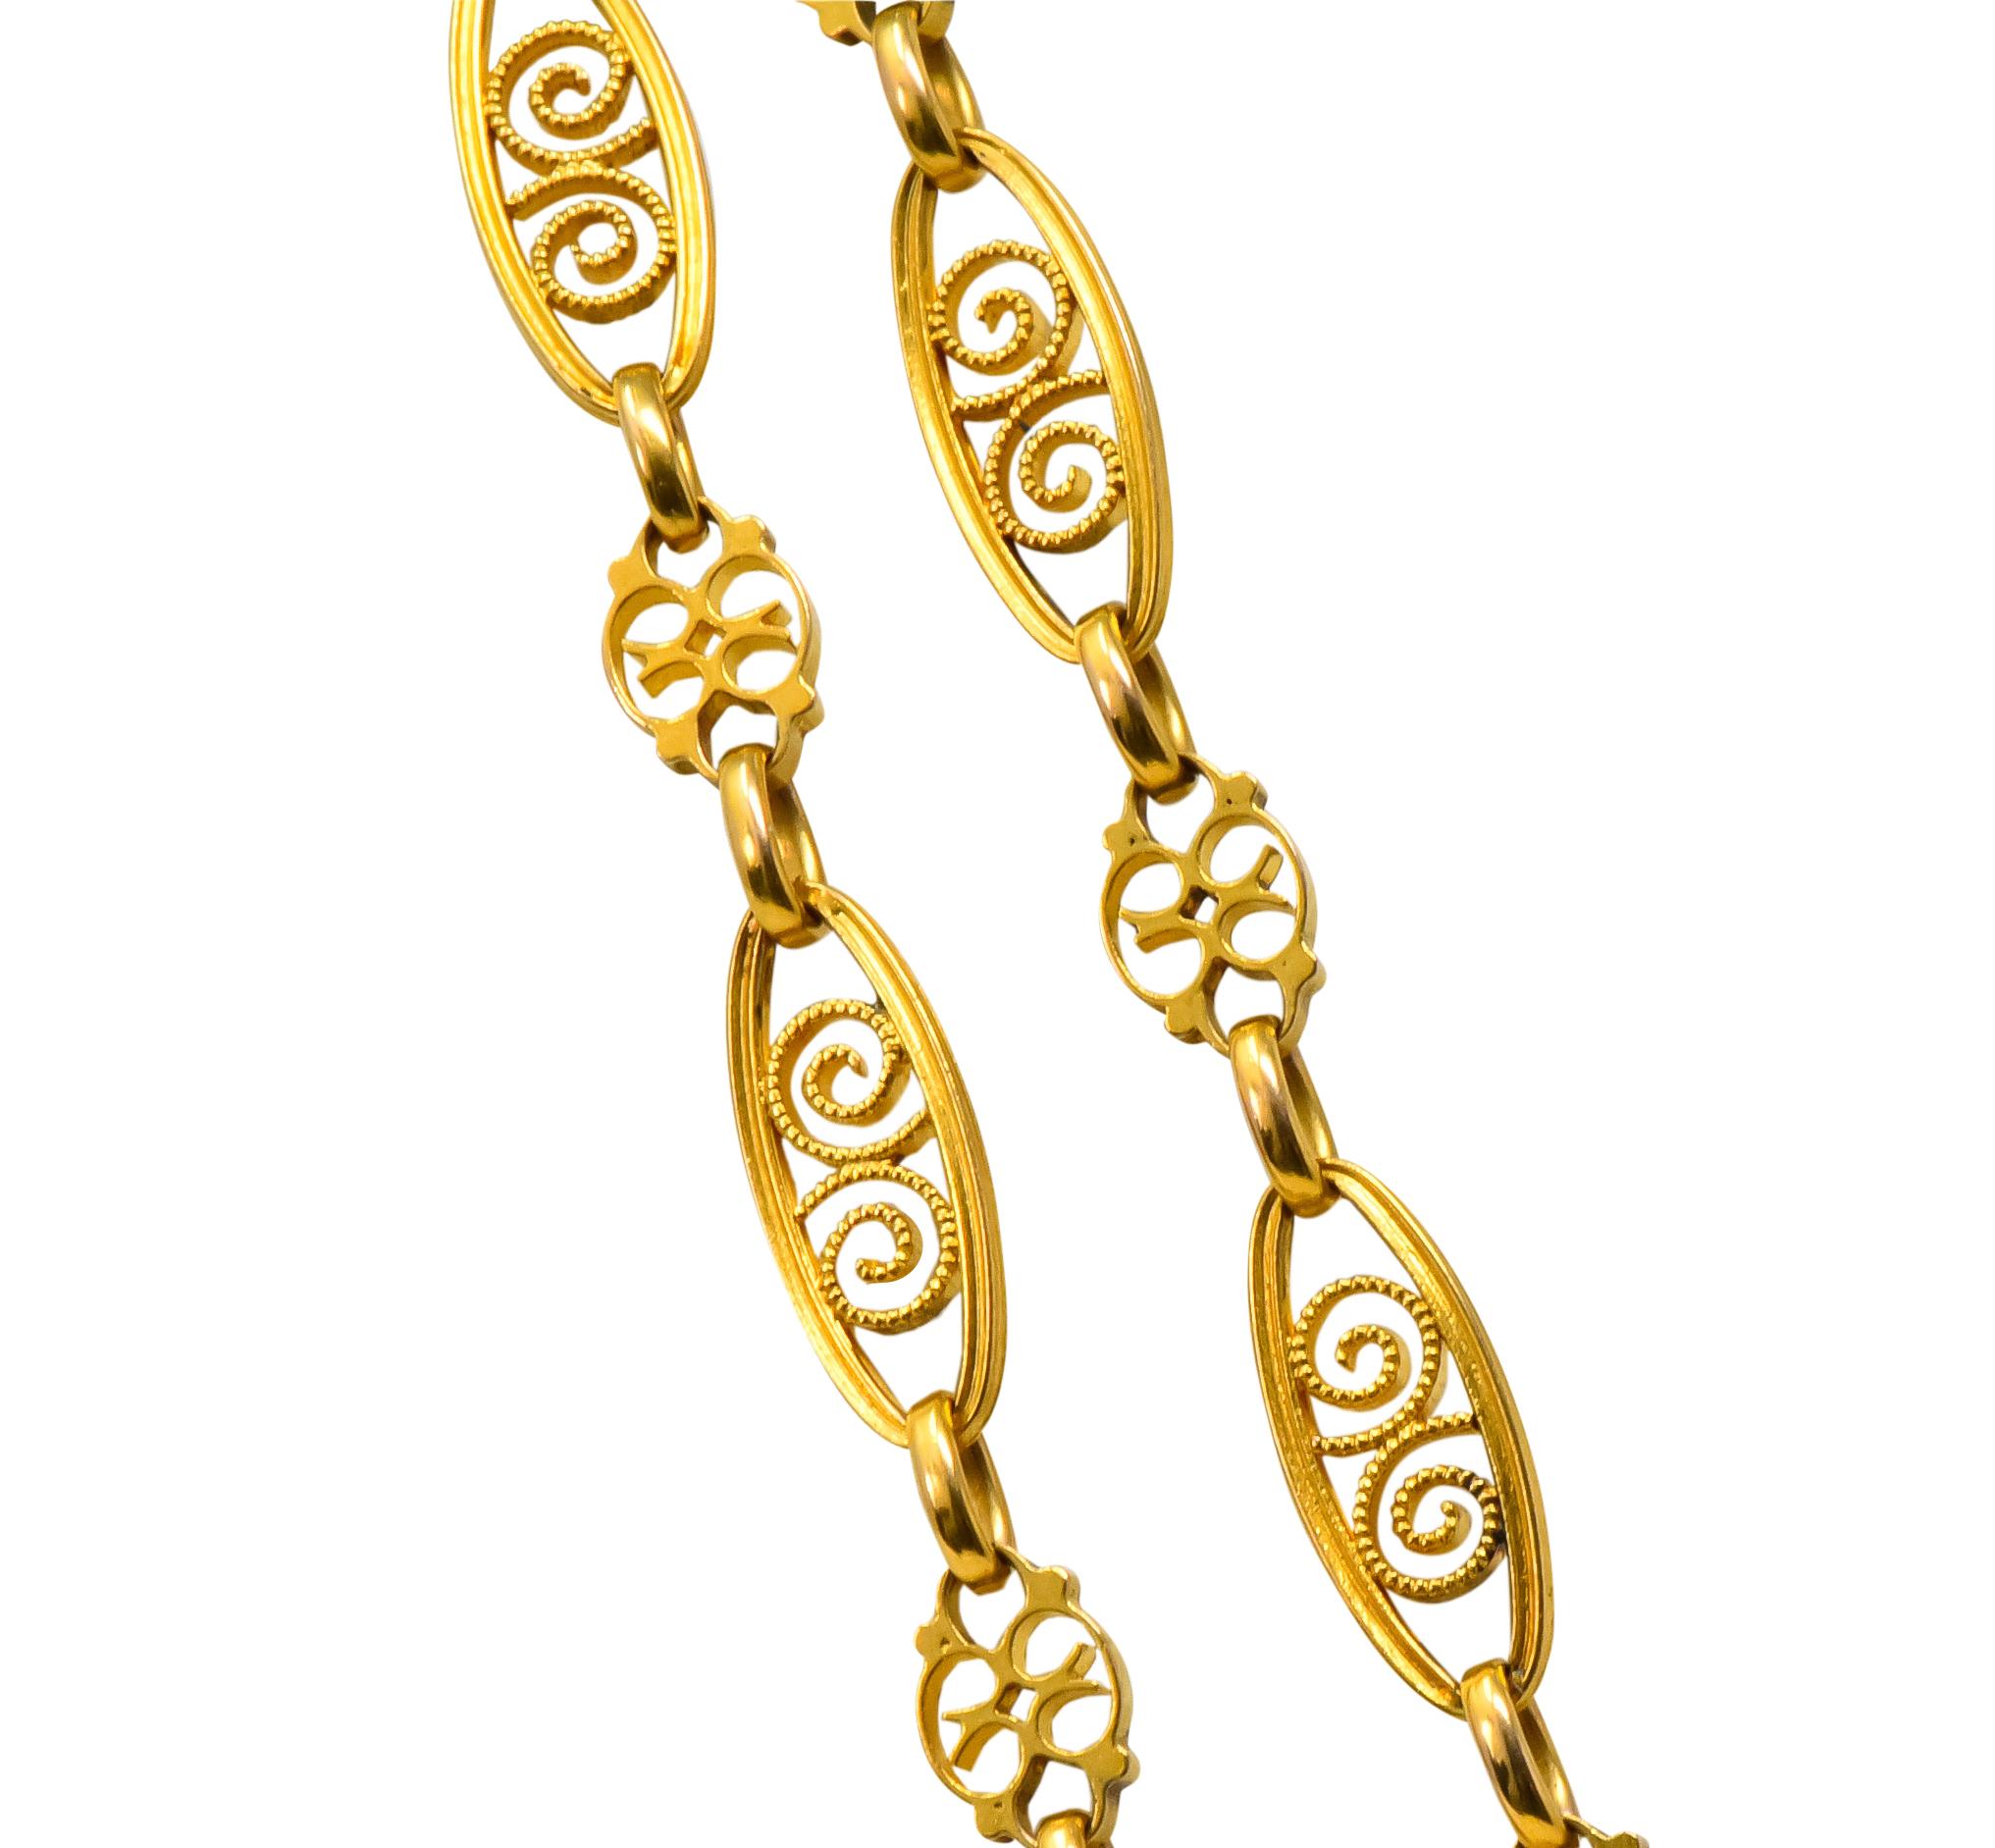 Fancy chain featuring pierced elongated links with swirled millegrain motifs and smaller alternating scrolled links

Completed by large spring ring clasp

Partial maker's mark with French assay marks for 18 karat gold

Circa 1840's

Length: 62